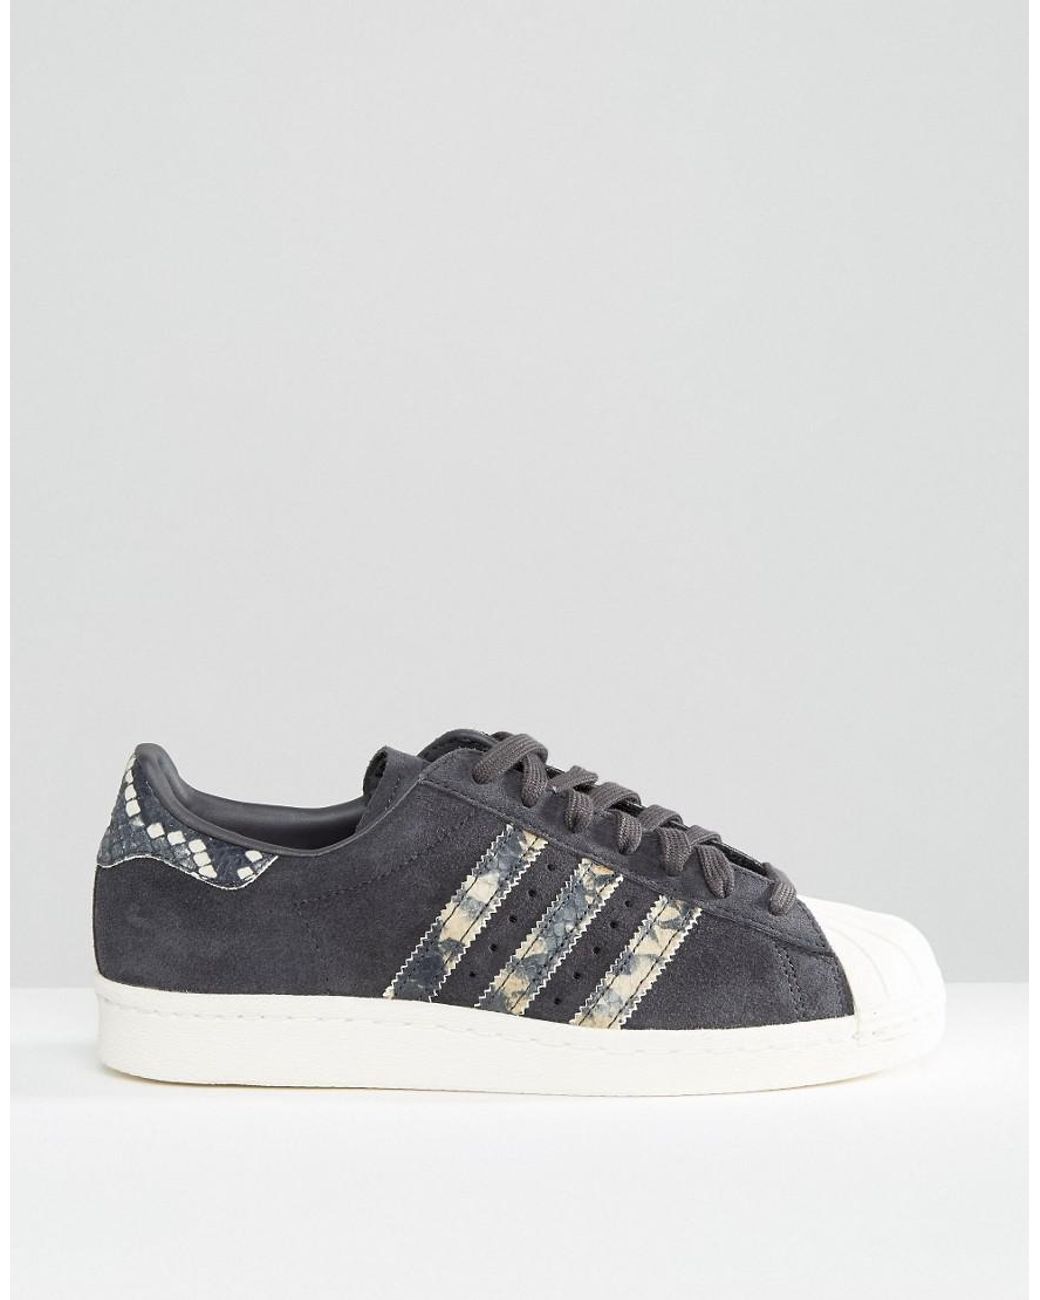 adidas Leather Superstar Suede And Snakeskin Sneakers in Black | Lyst